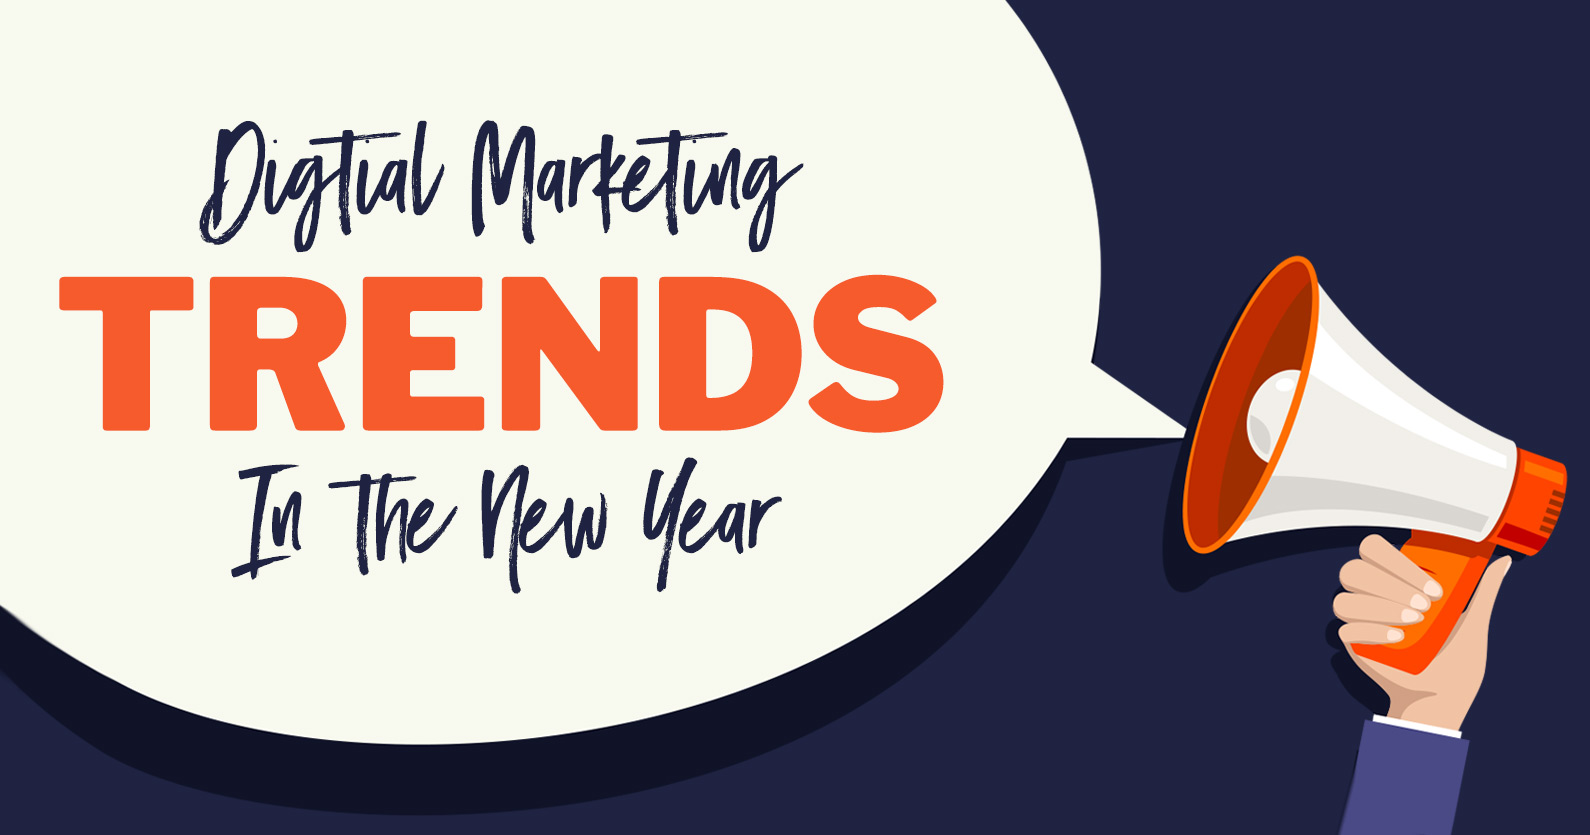 Digital Marketing Trends in the New Year